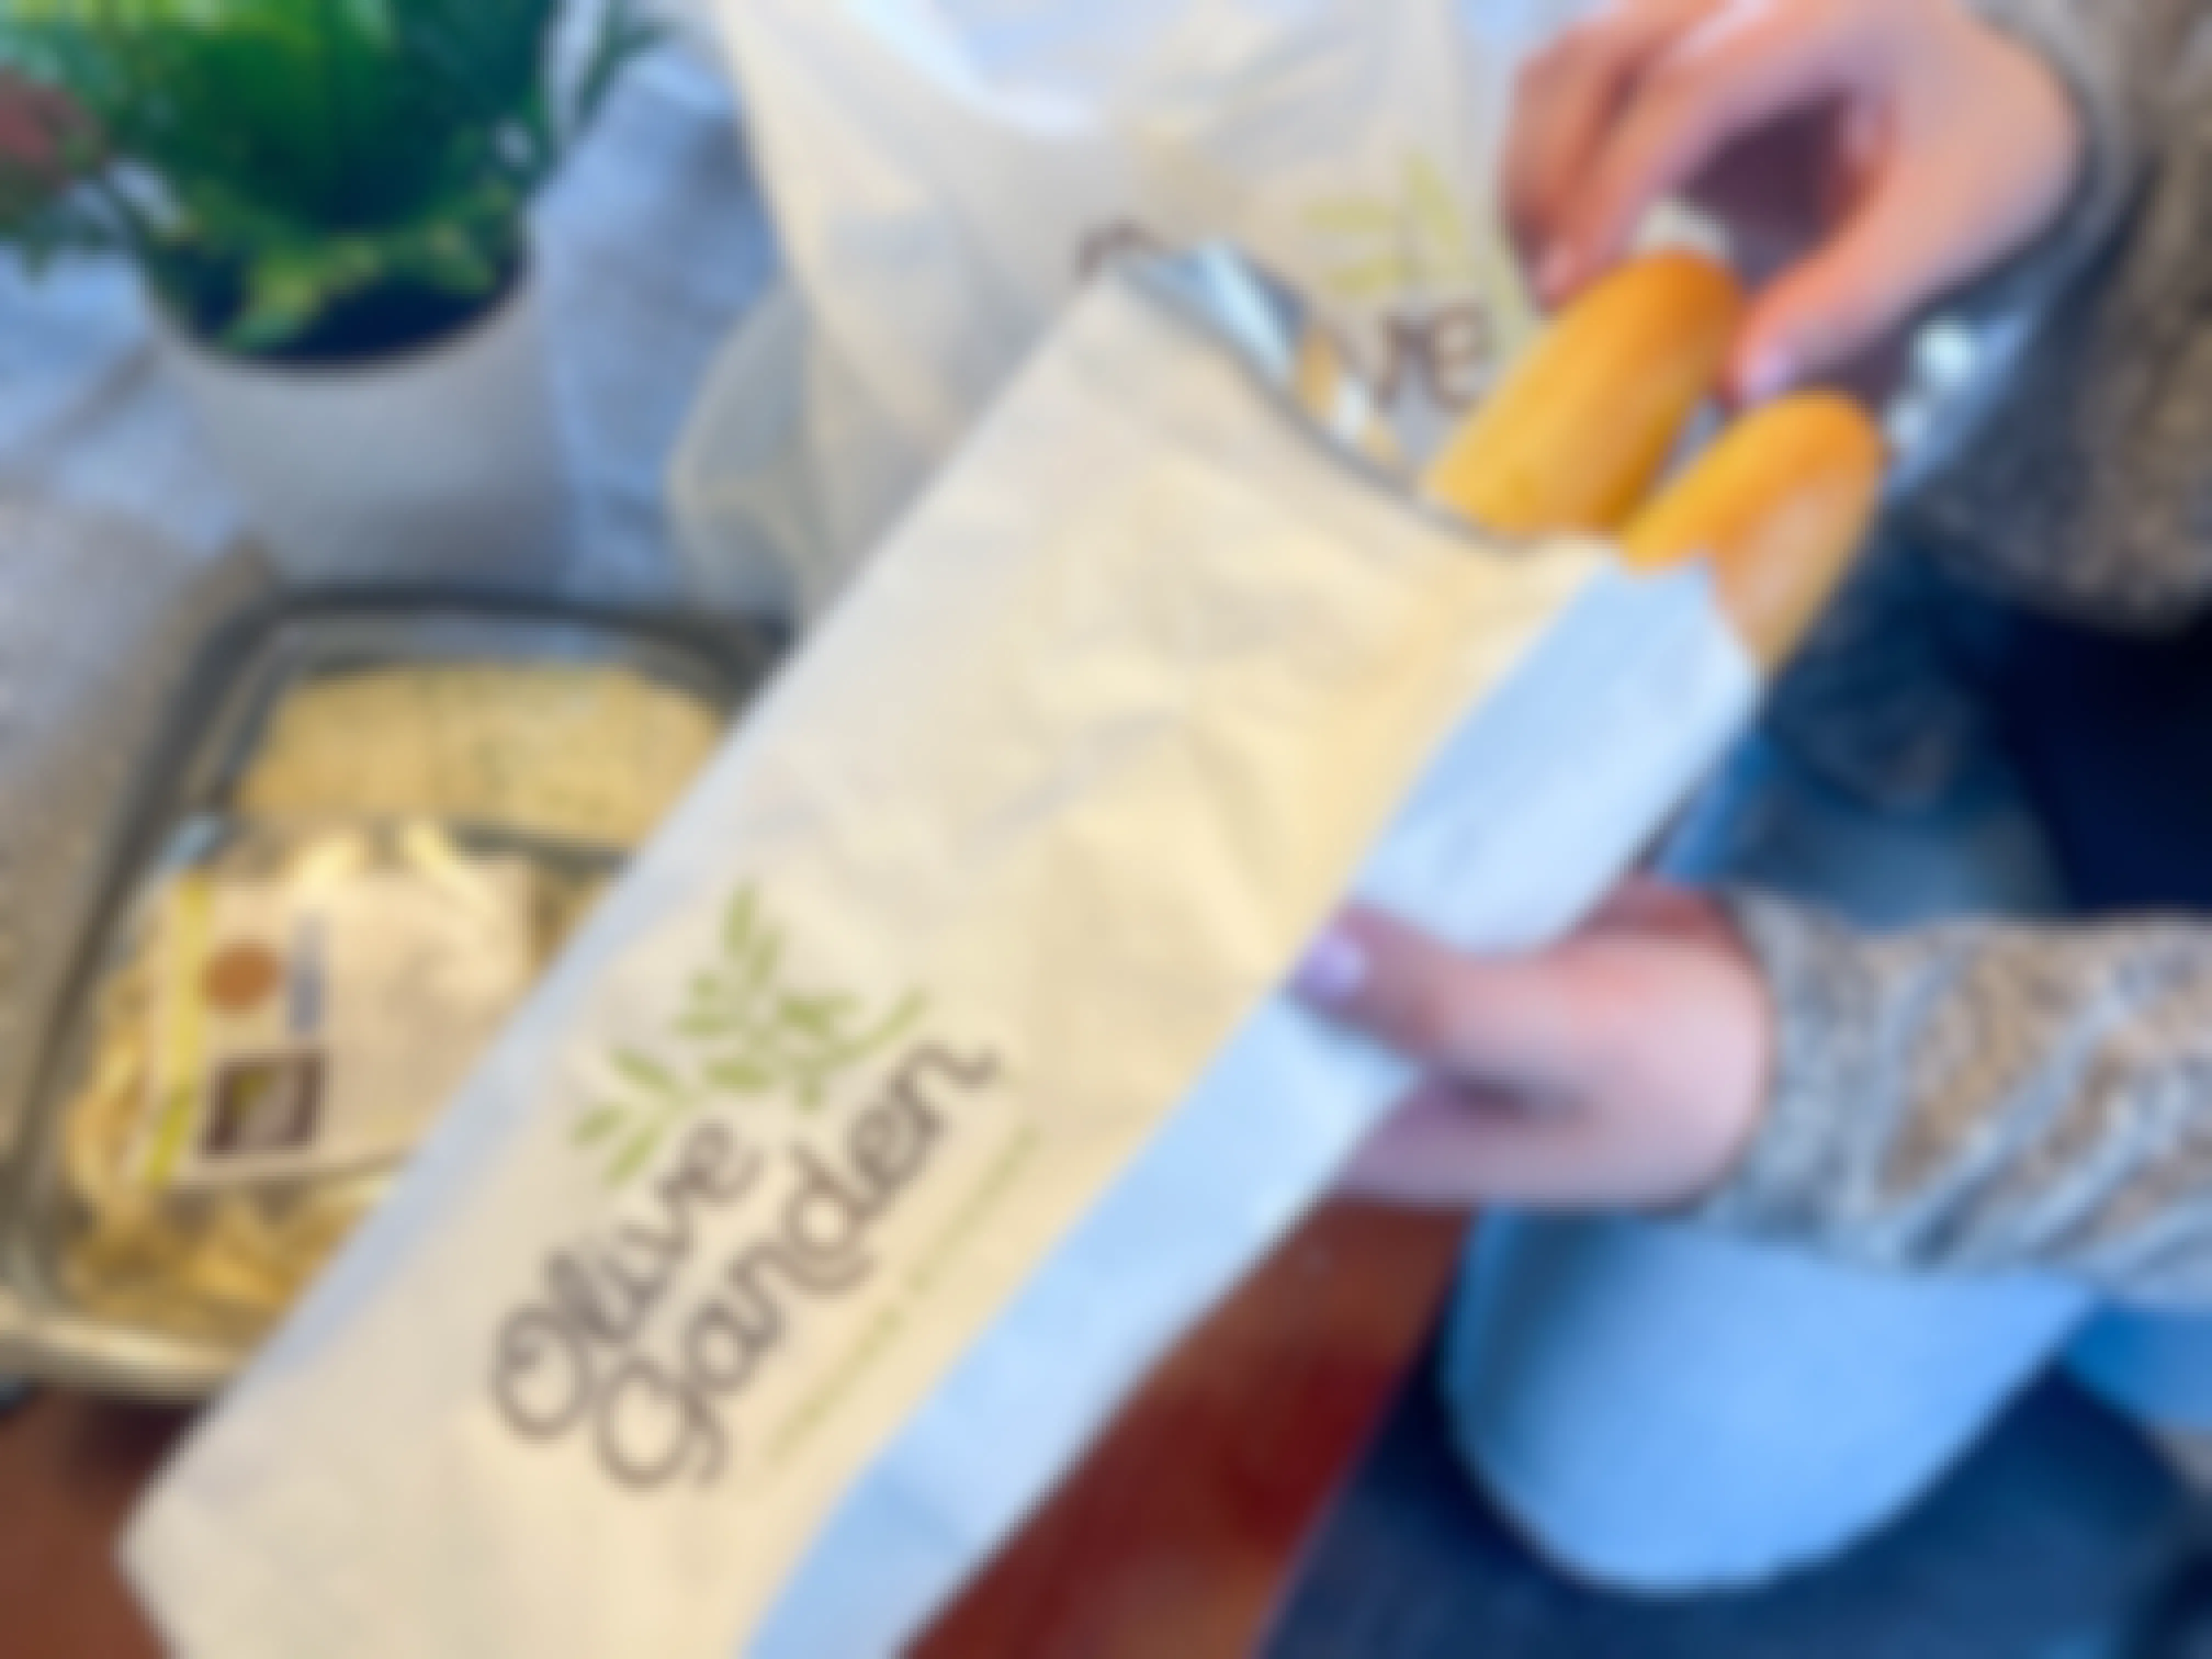 A person taking a breadstick out of an Olive Garden bag.